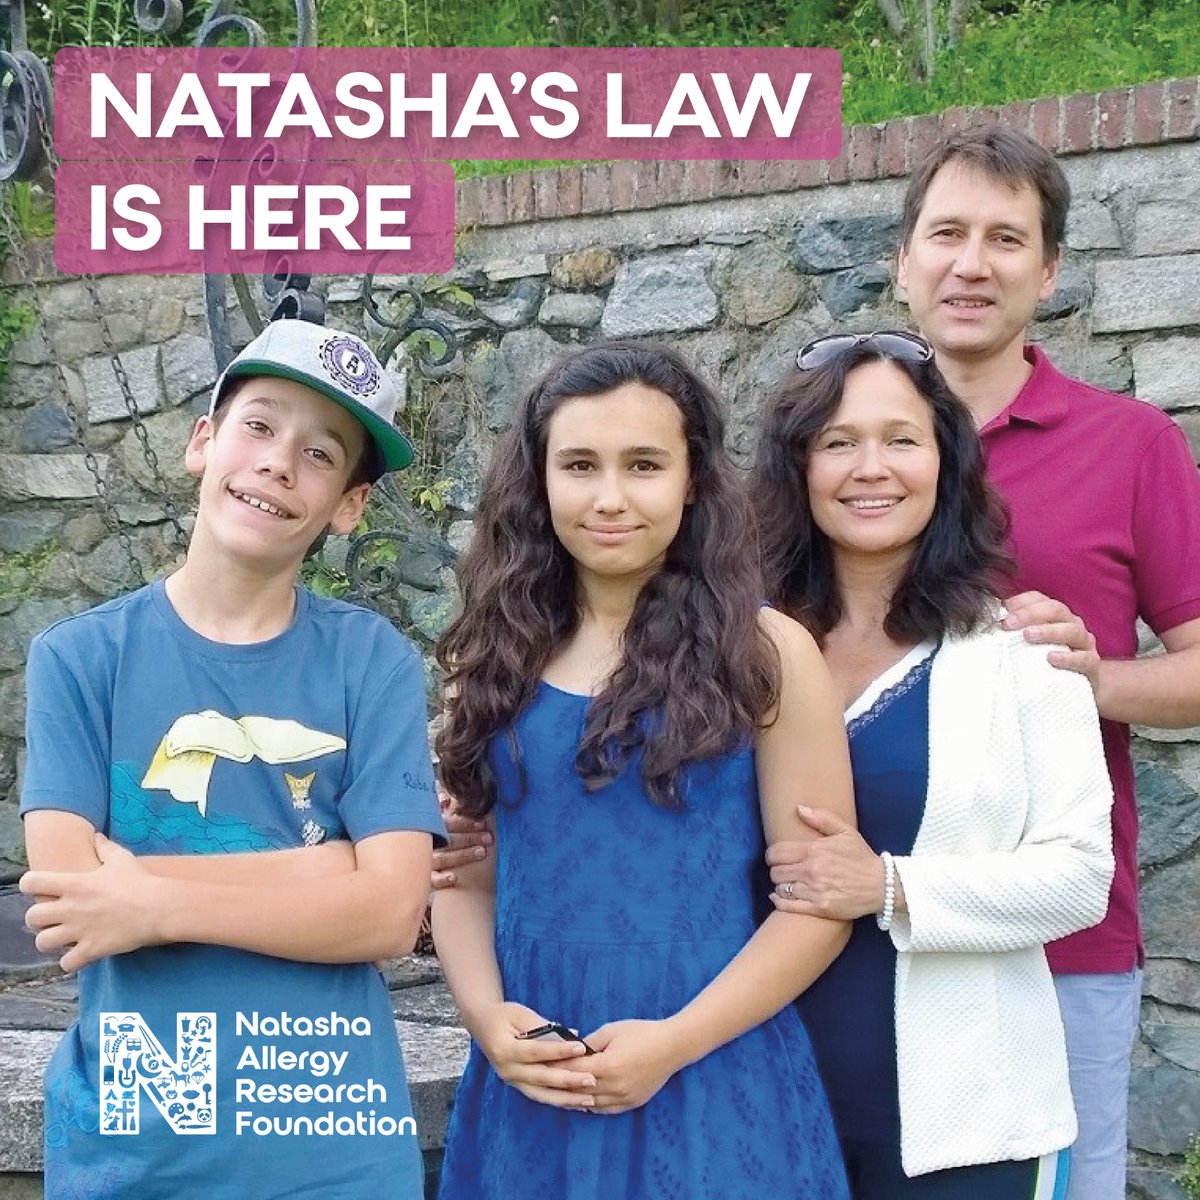 Nothing can bring Natasha back, and we have to live with that reality every day, but we know in our hearts that today 1st October 2021 - as #natashaslaw comes into force - she would be very proud that a law in her name will help to protect others. 
Tanya, Nadim and Alex
❤️❤️❤️